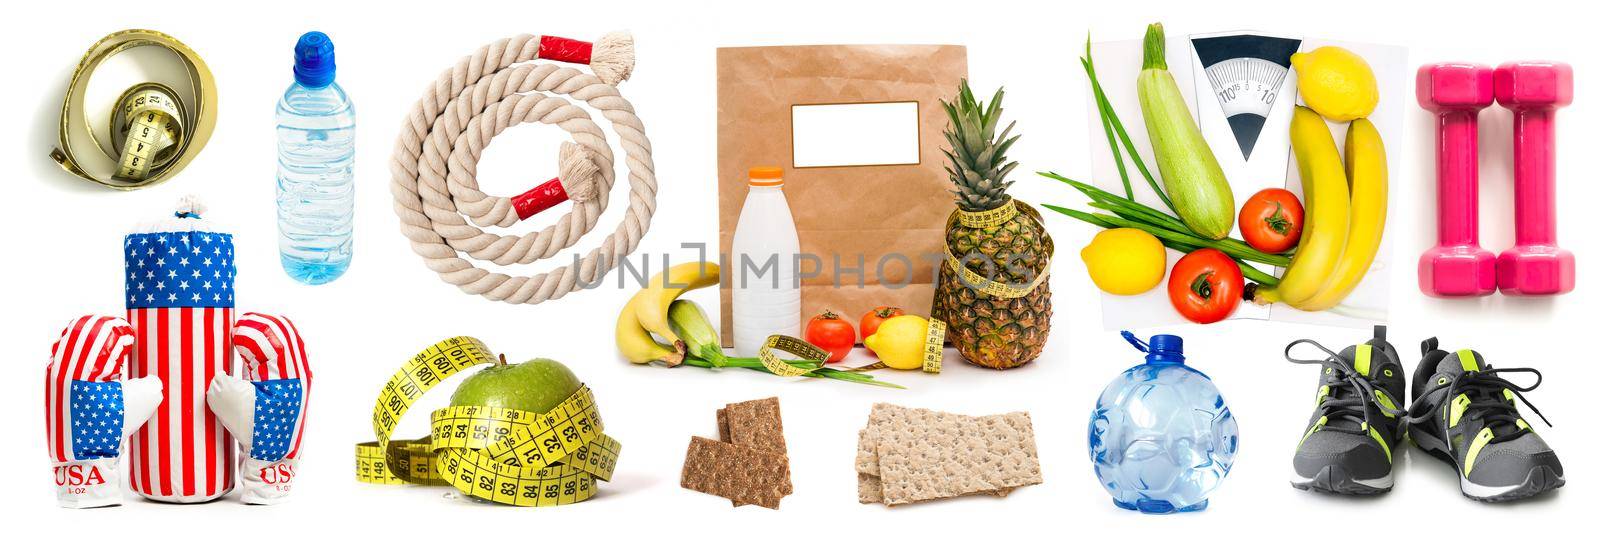 Sport healthy life equipment and diet set collage isolated on white background. Fitness collection with food and workout tools